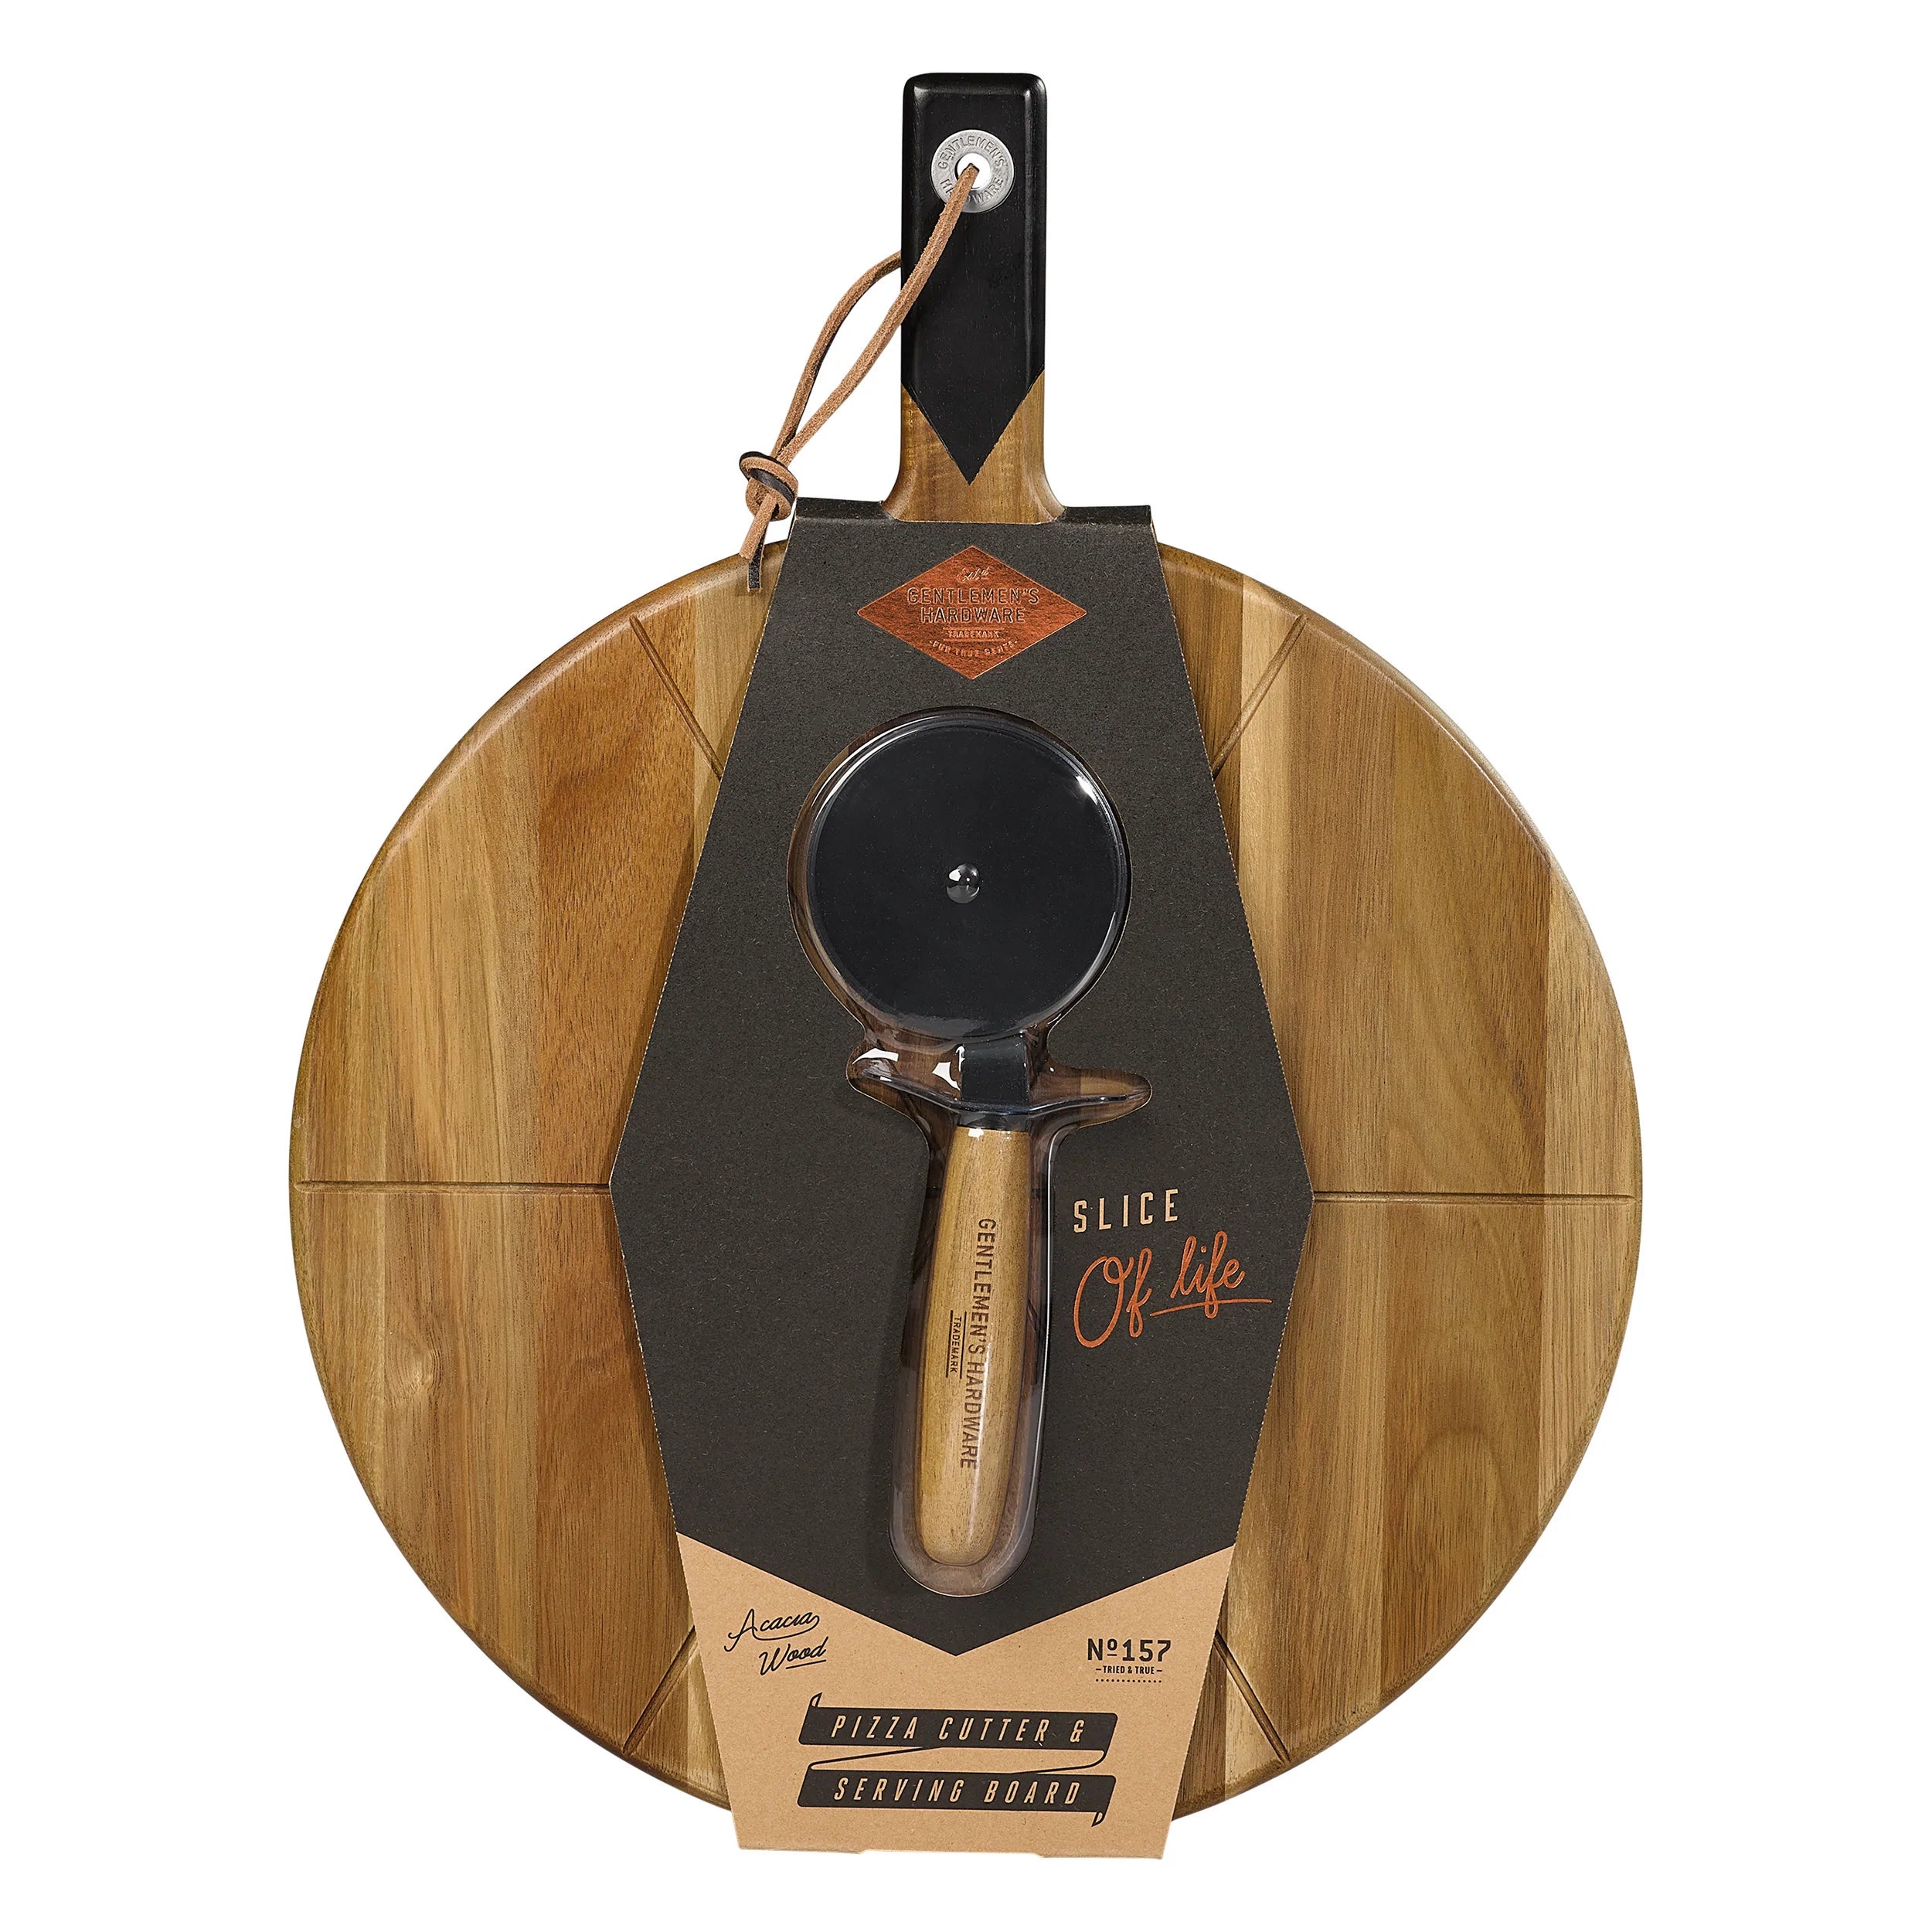 Gentleman's Hardware Pizza Cutter and Serving Board